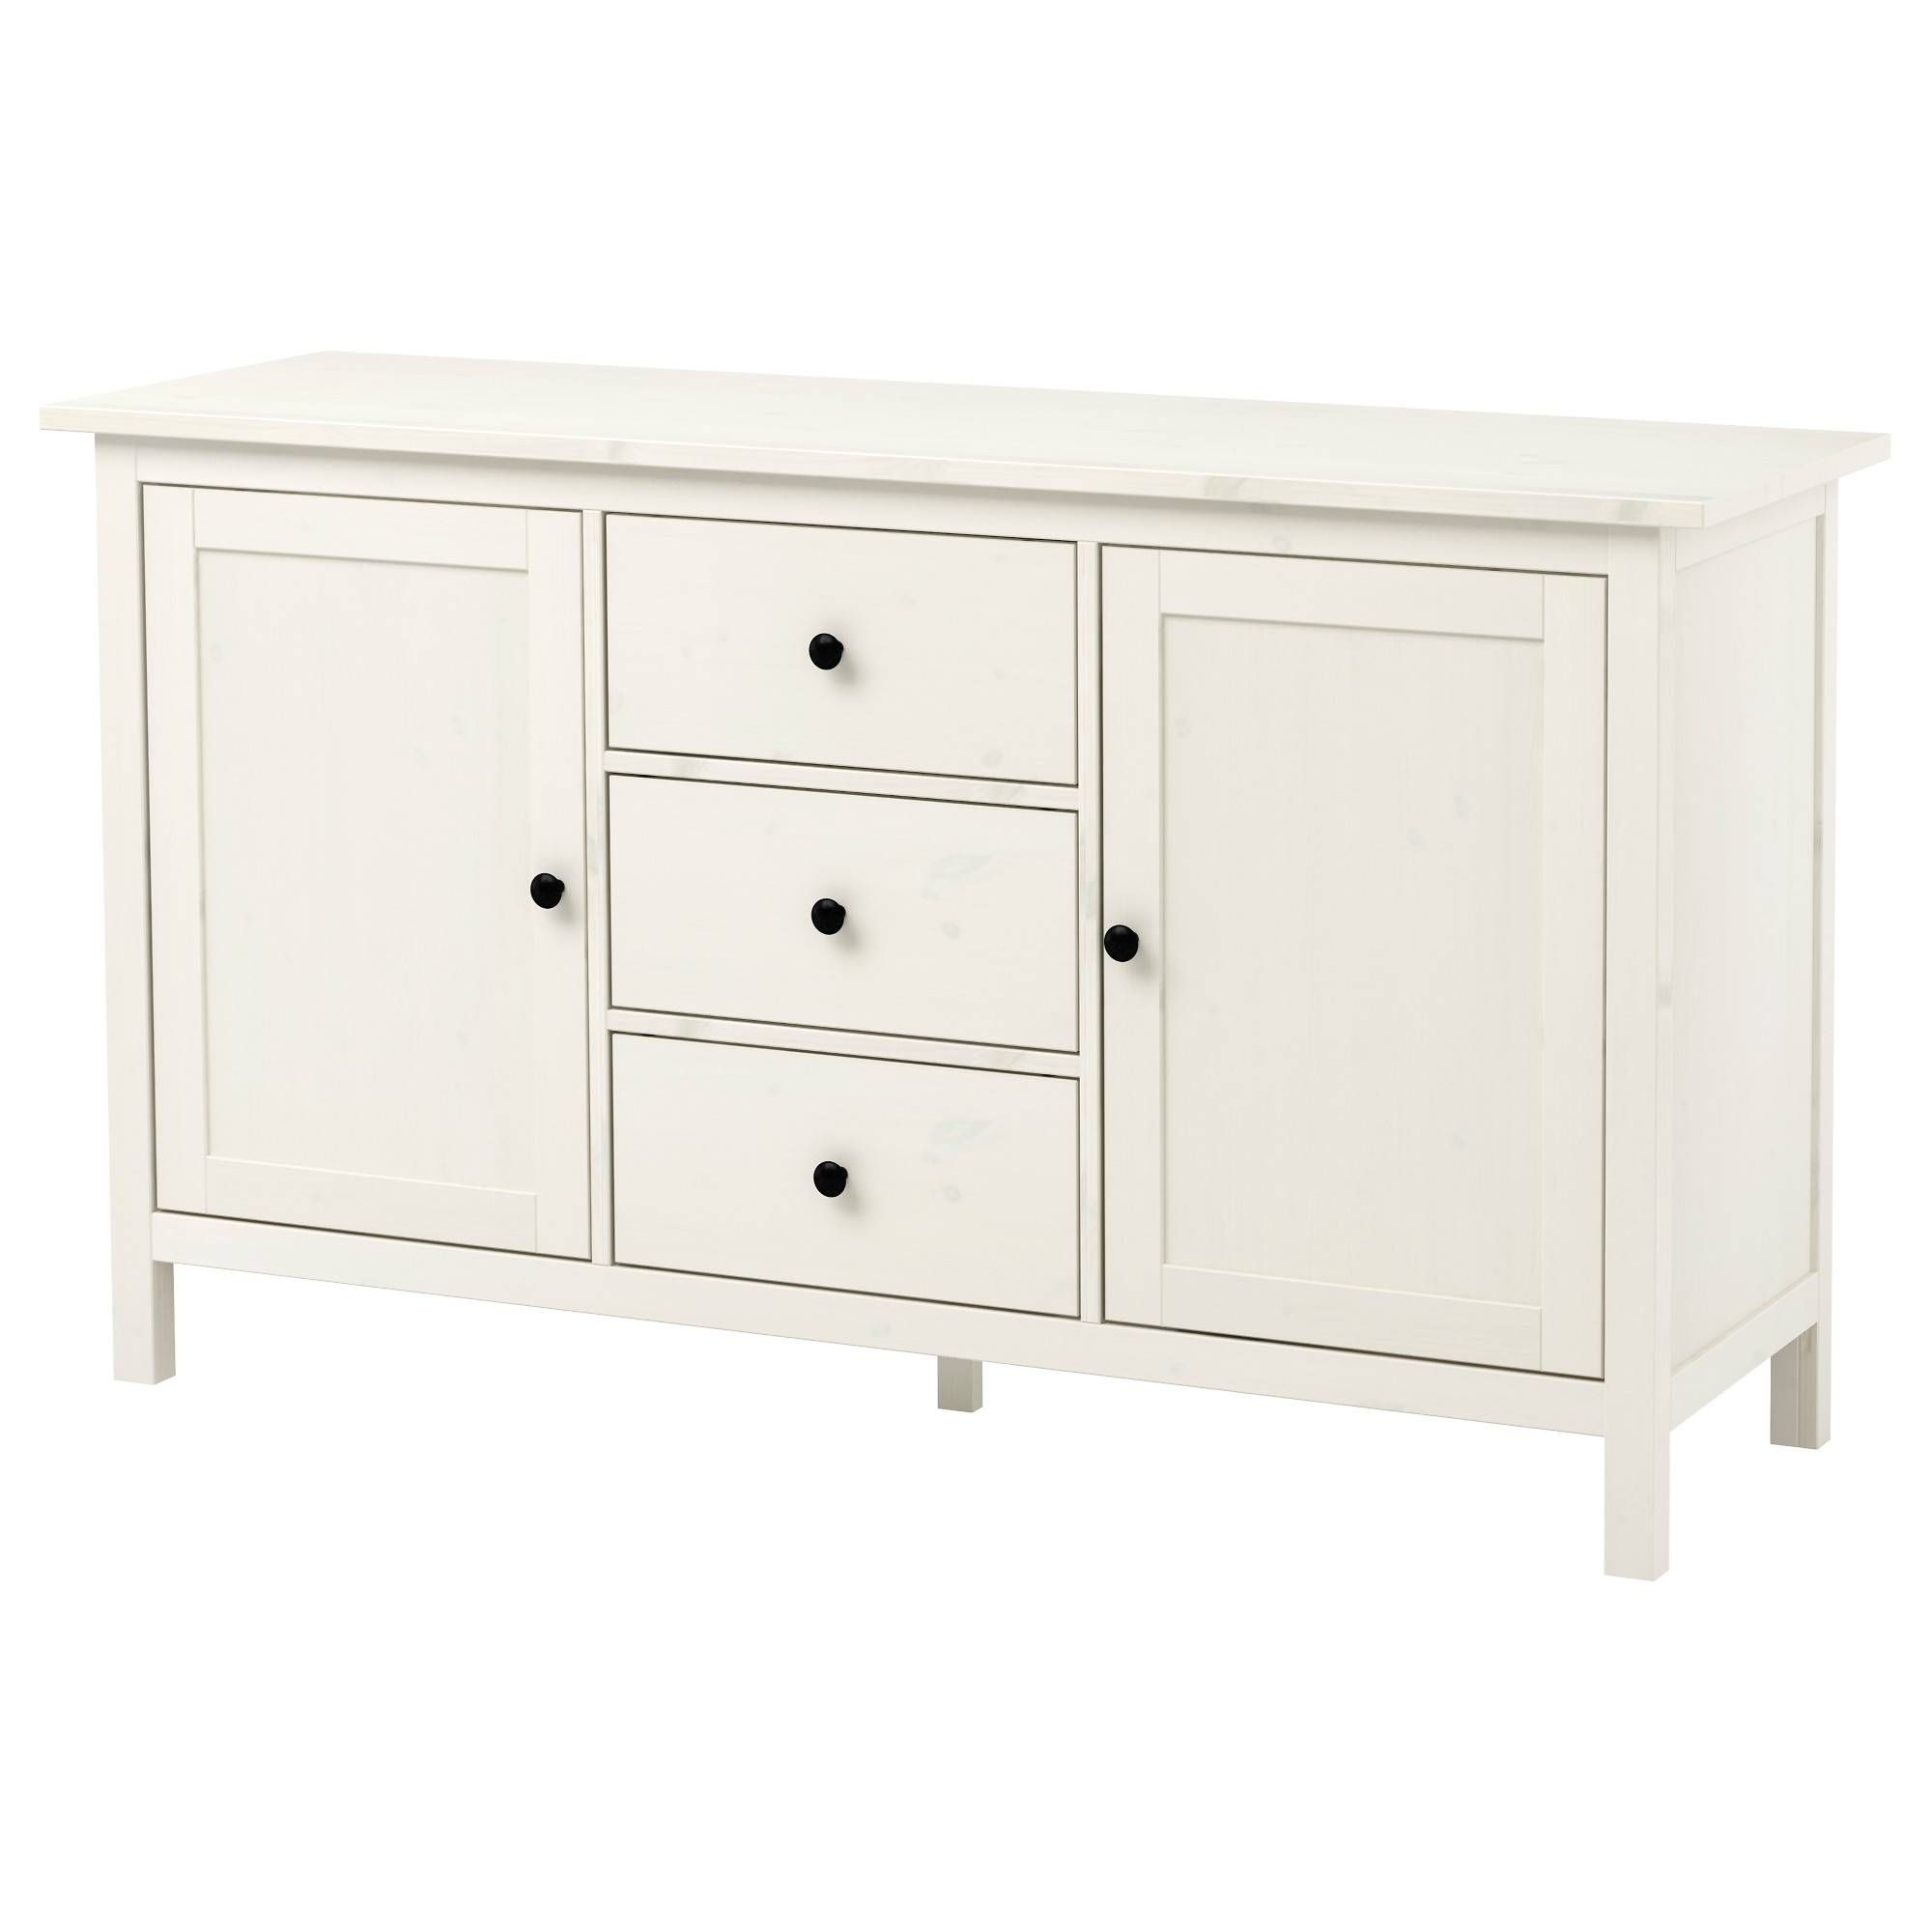 Hemnes Sideboard – White Stain – Ikea For Buffet Sideboards (View 2 of 15)